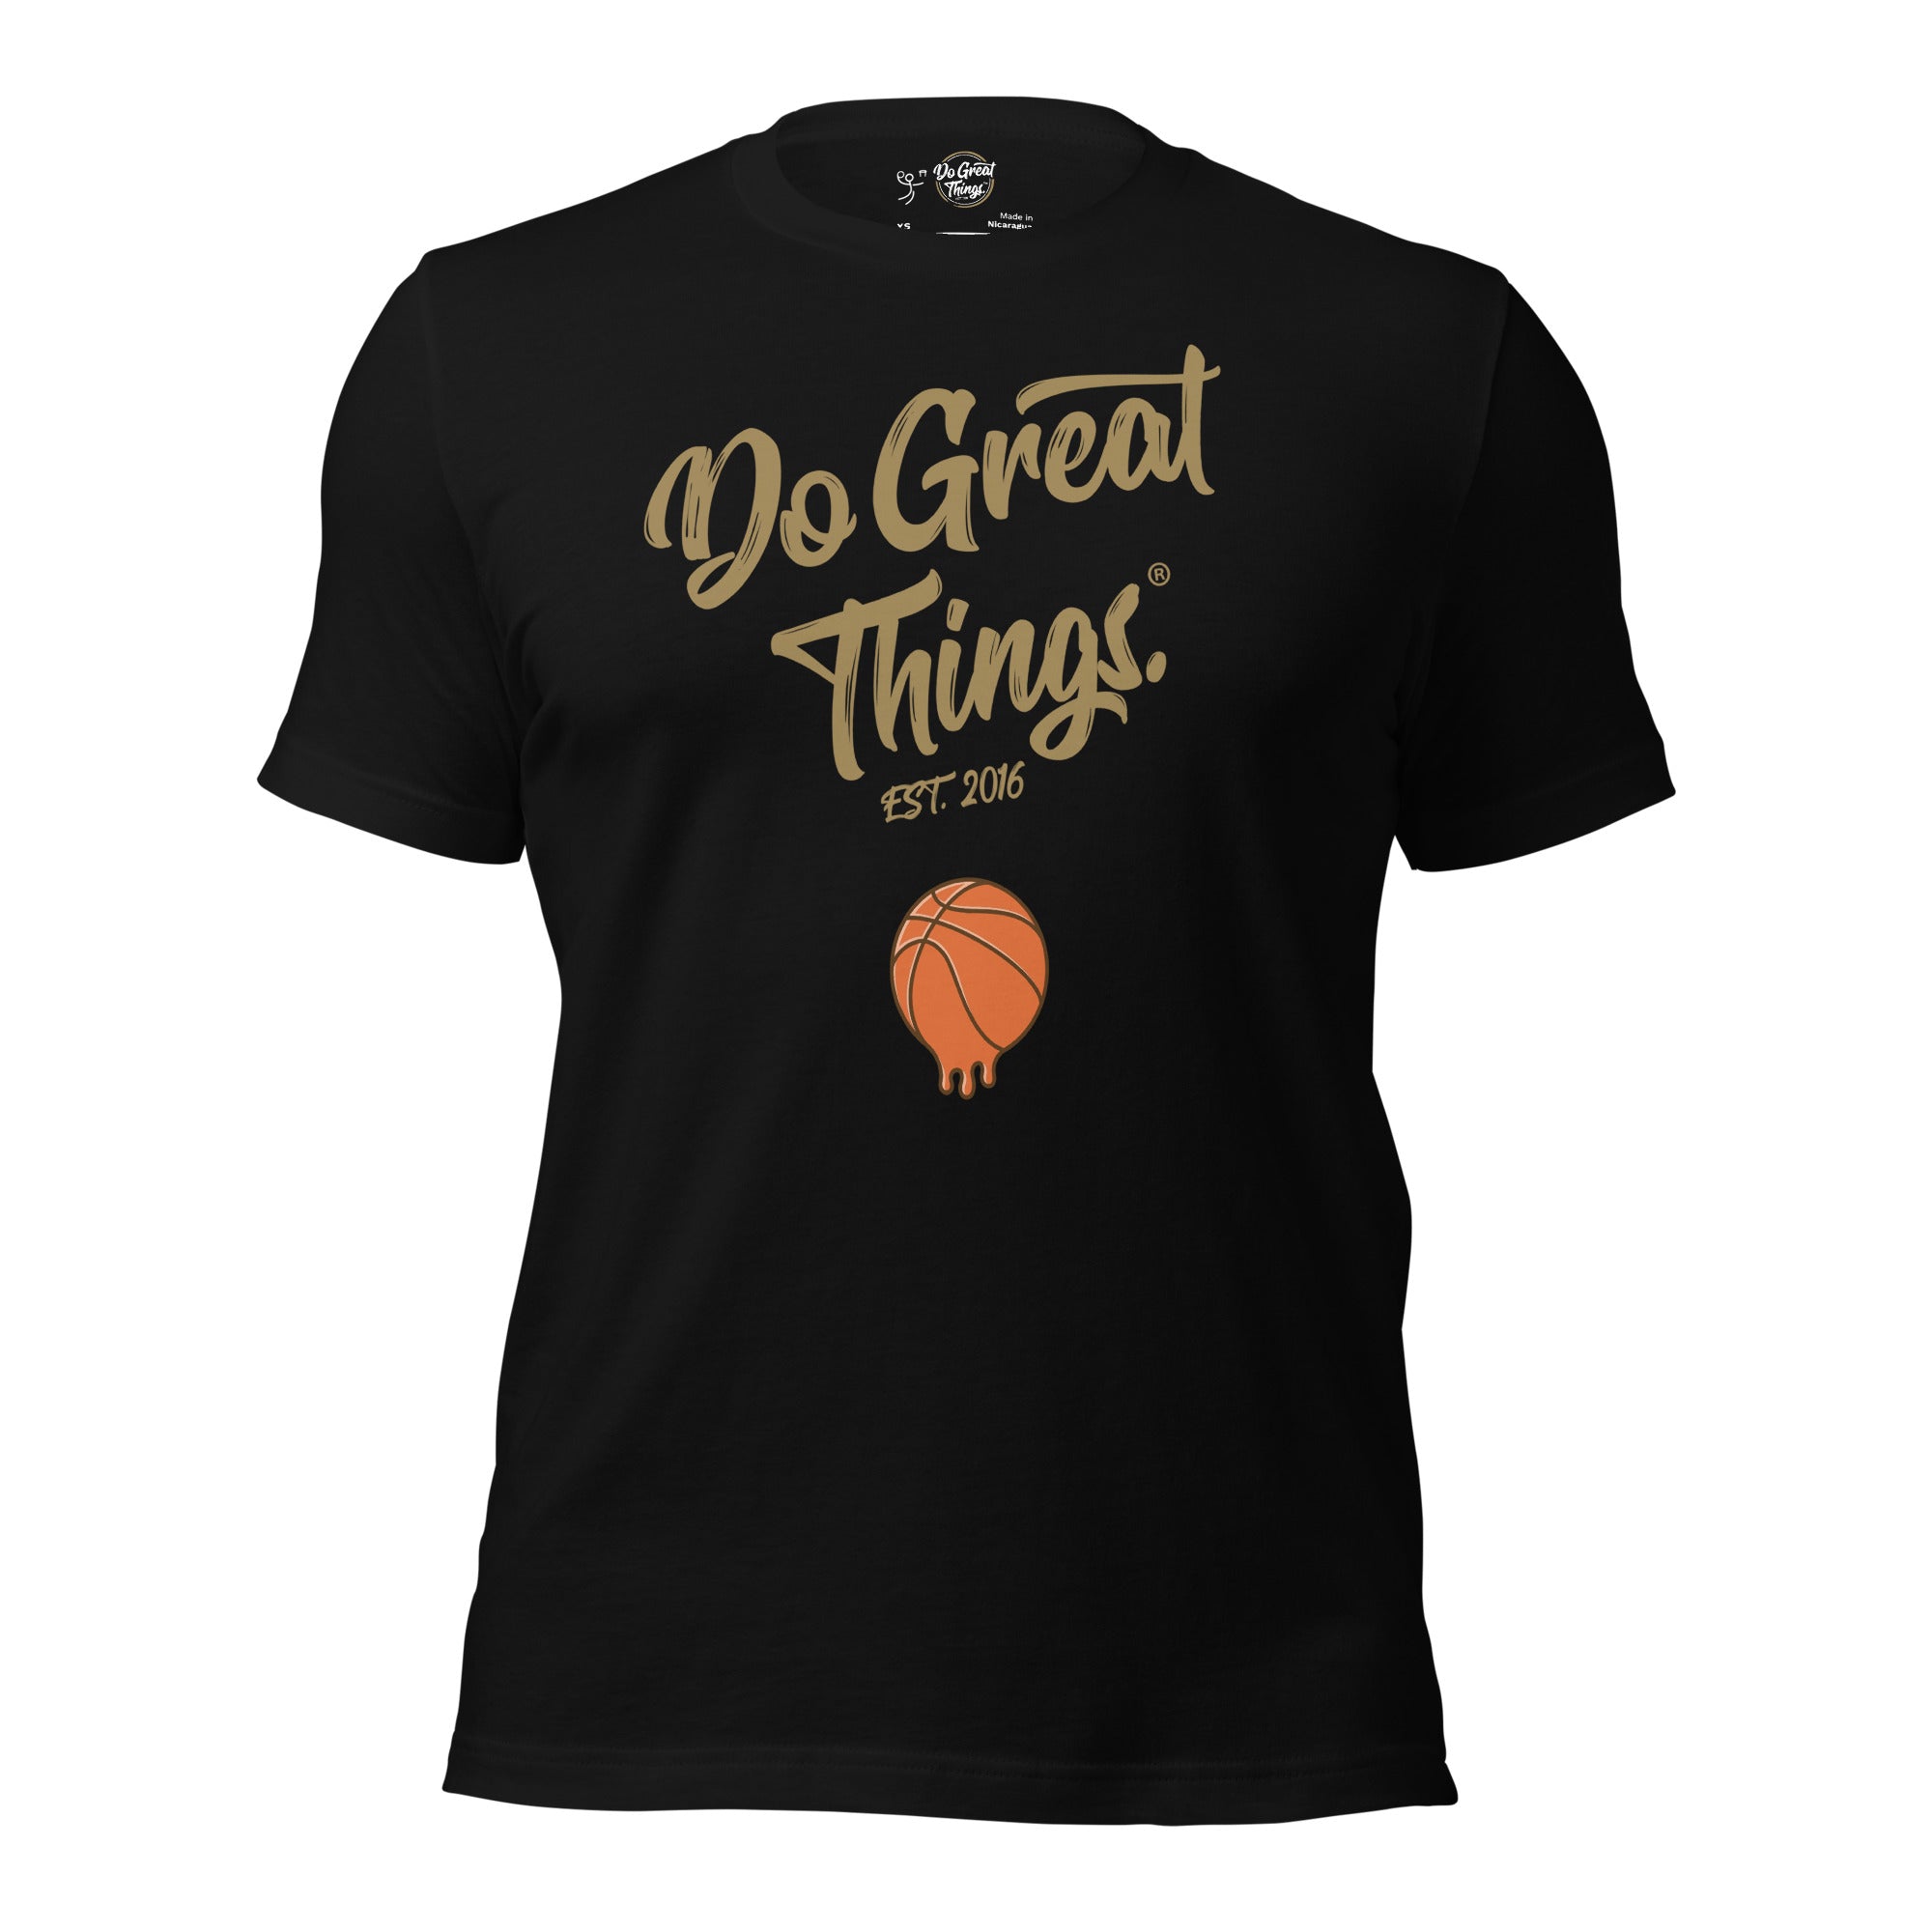 Do Great Things® Basketball t-shirt